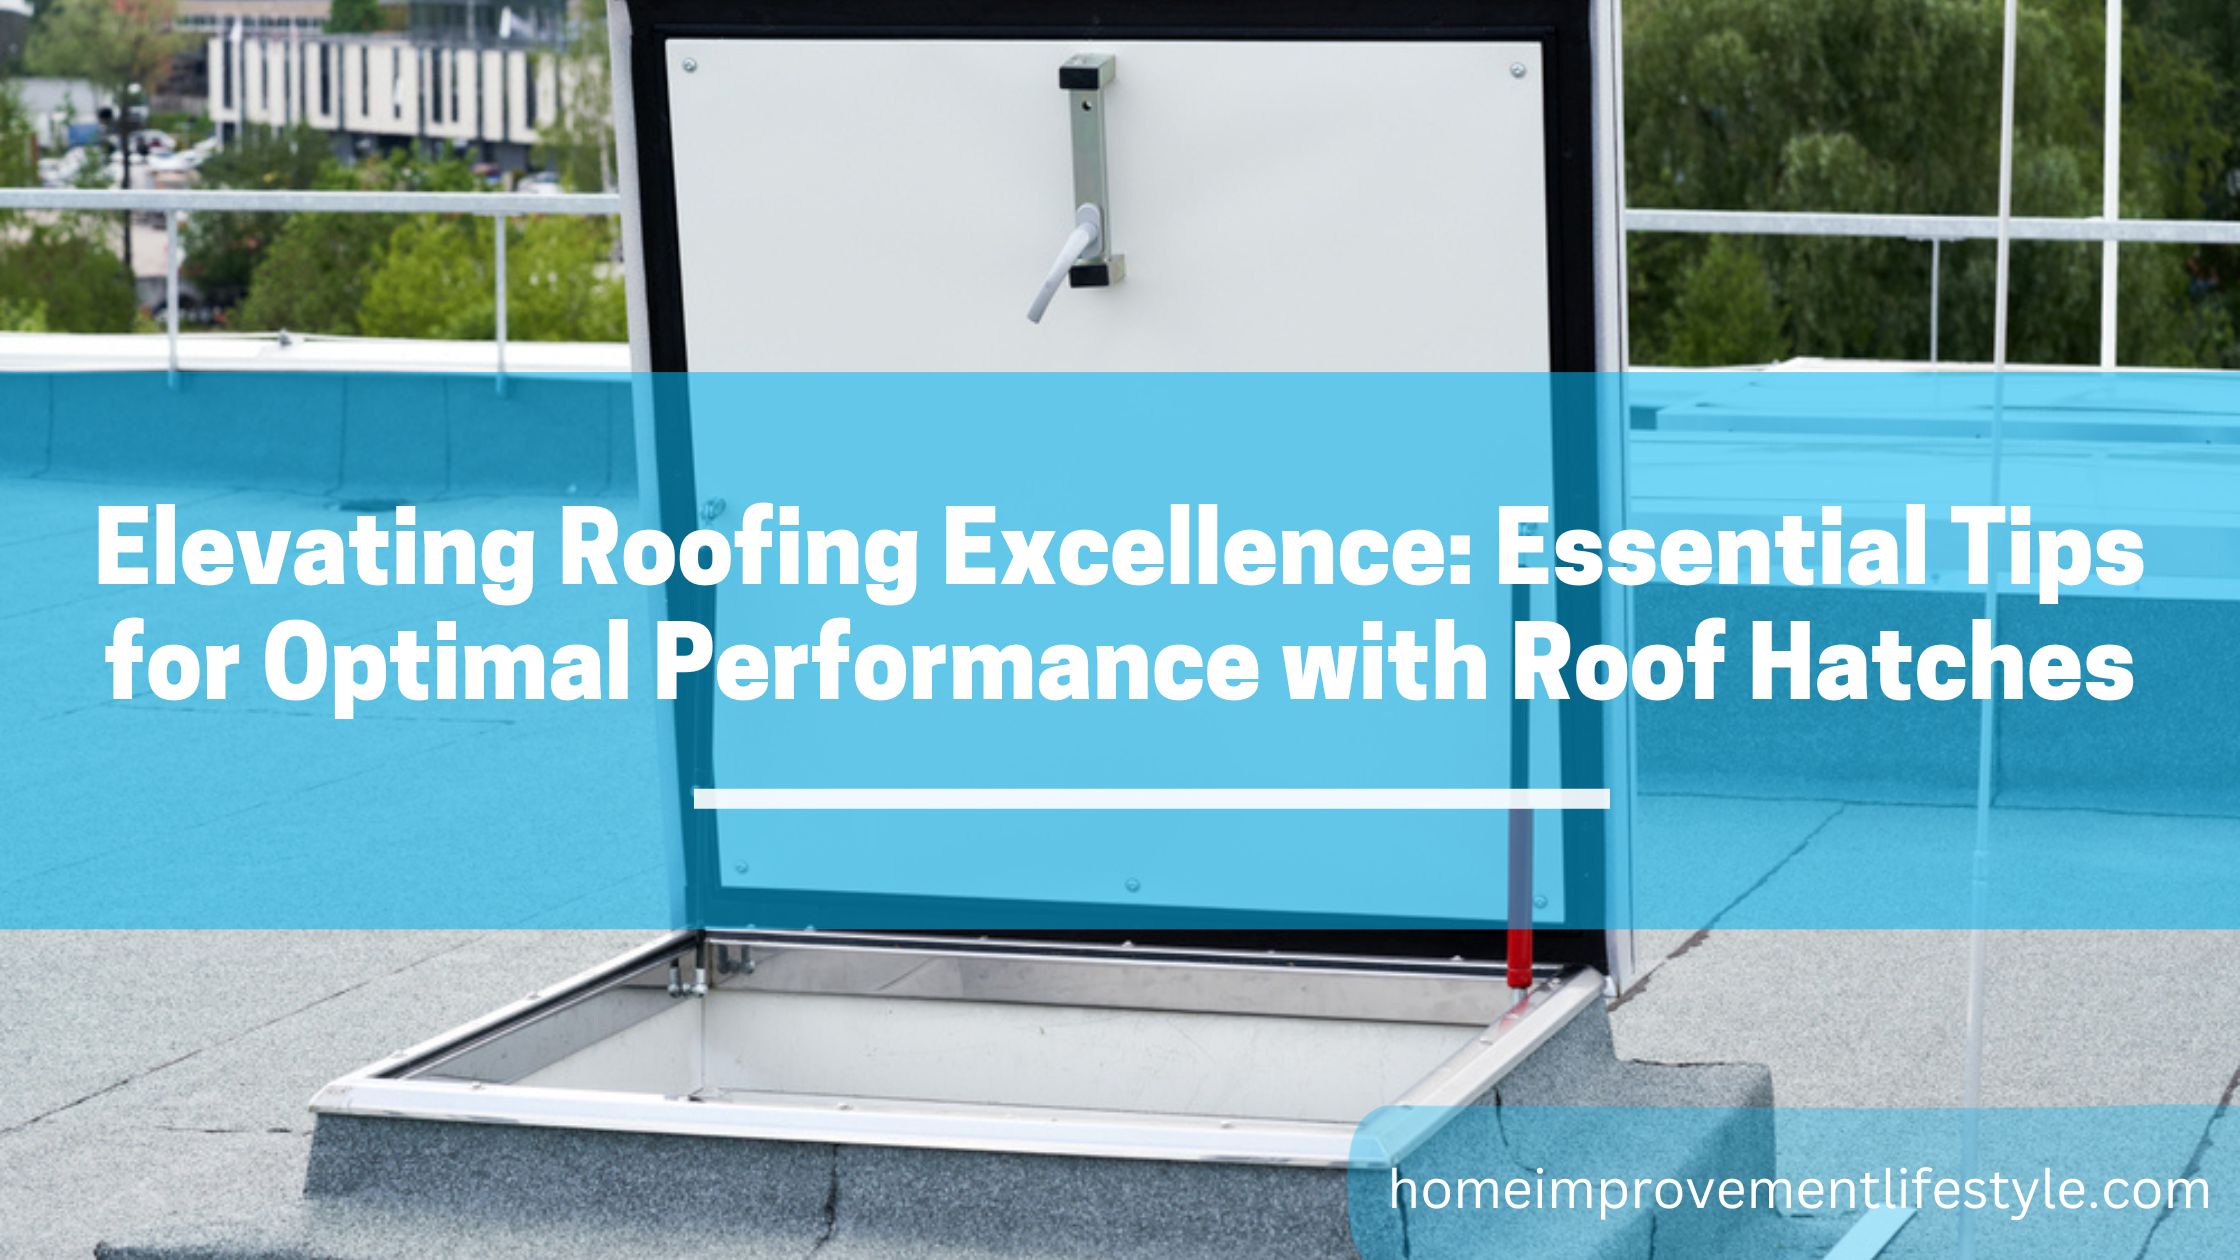 Elevating Roofing Excellence: Essential Tips for Optimal Performance with Roof Hatches